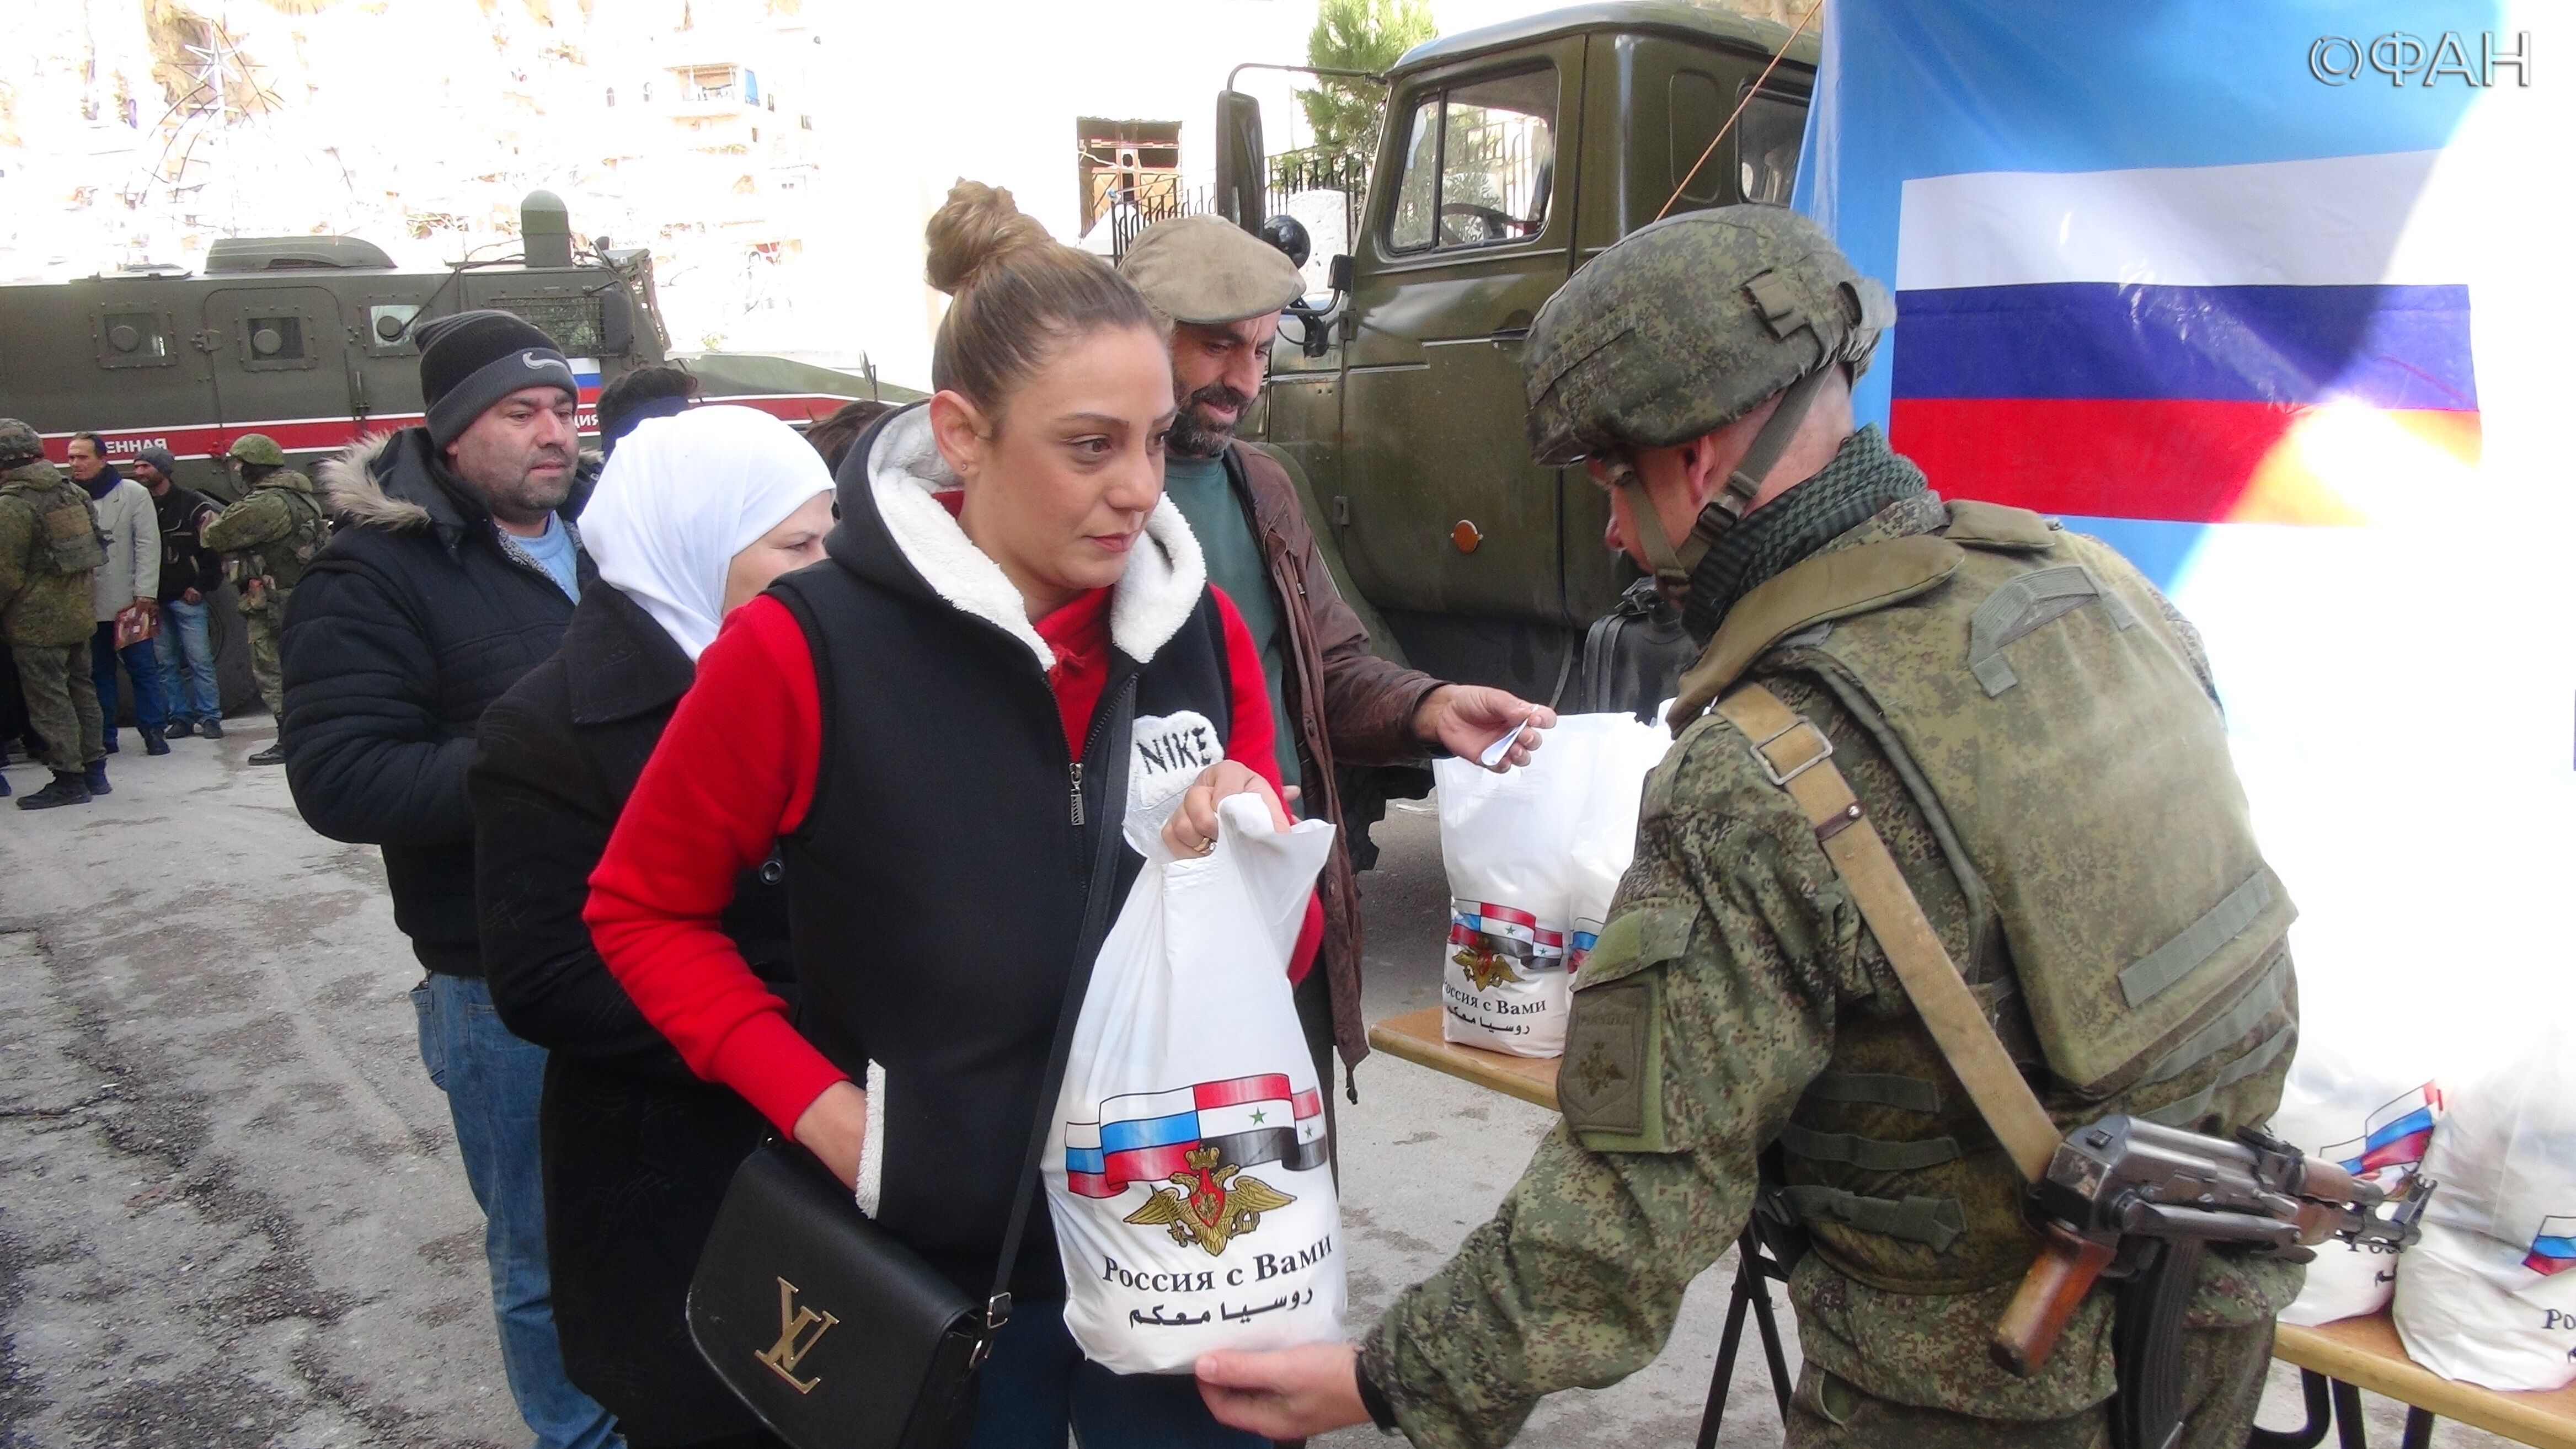 Syria news 11 Martha 22.30: humanitarian aid from Russia arrived in Idlib, SDF announced the deaths of three Turkish soldiers in Raqqa